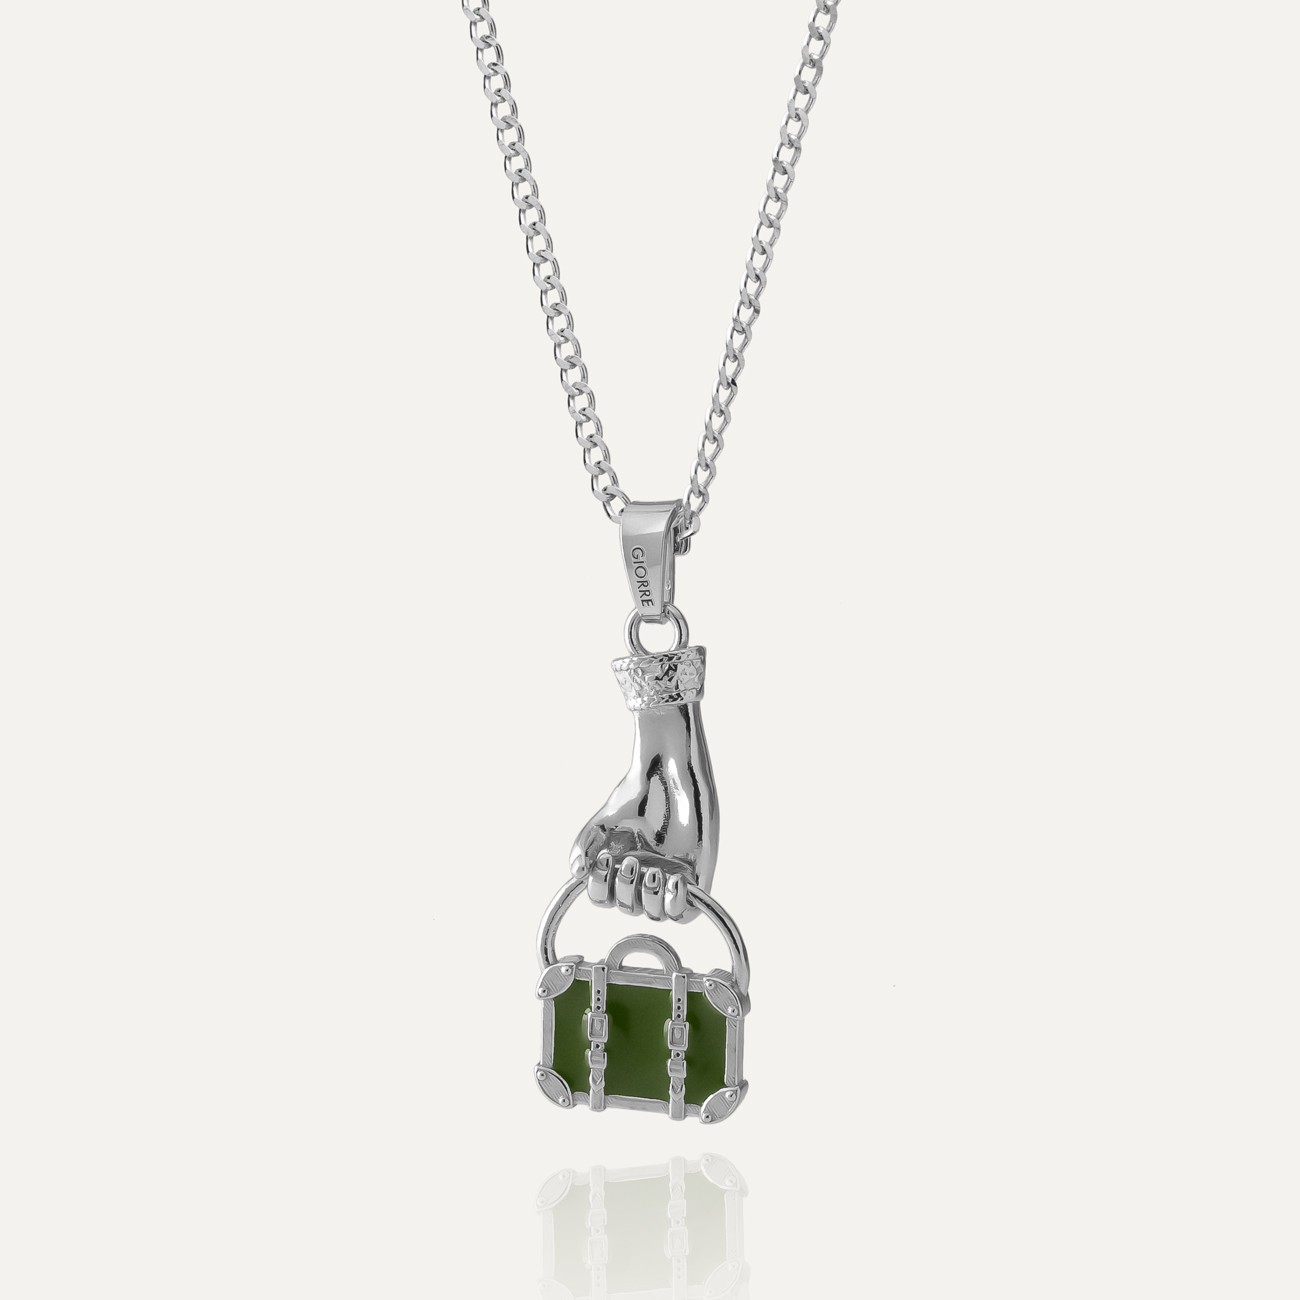 Hand necklace with suitcase, sterling silver 925